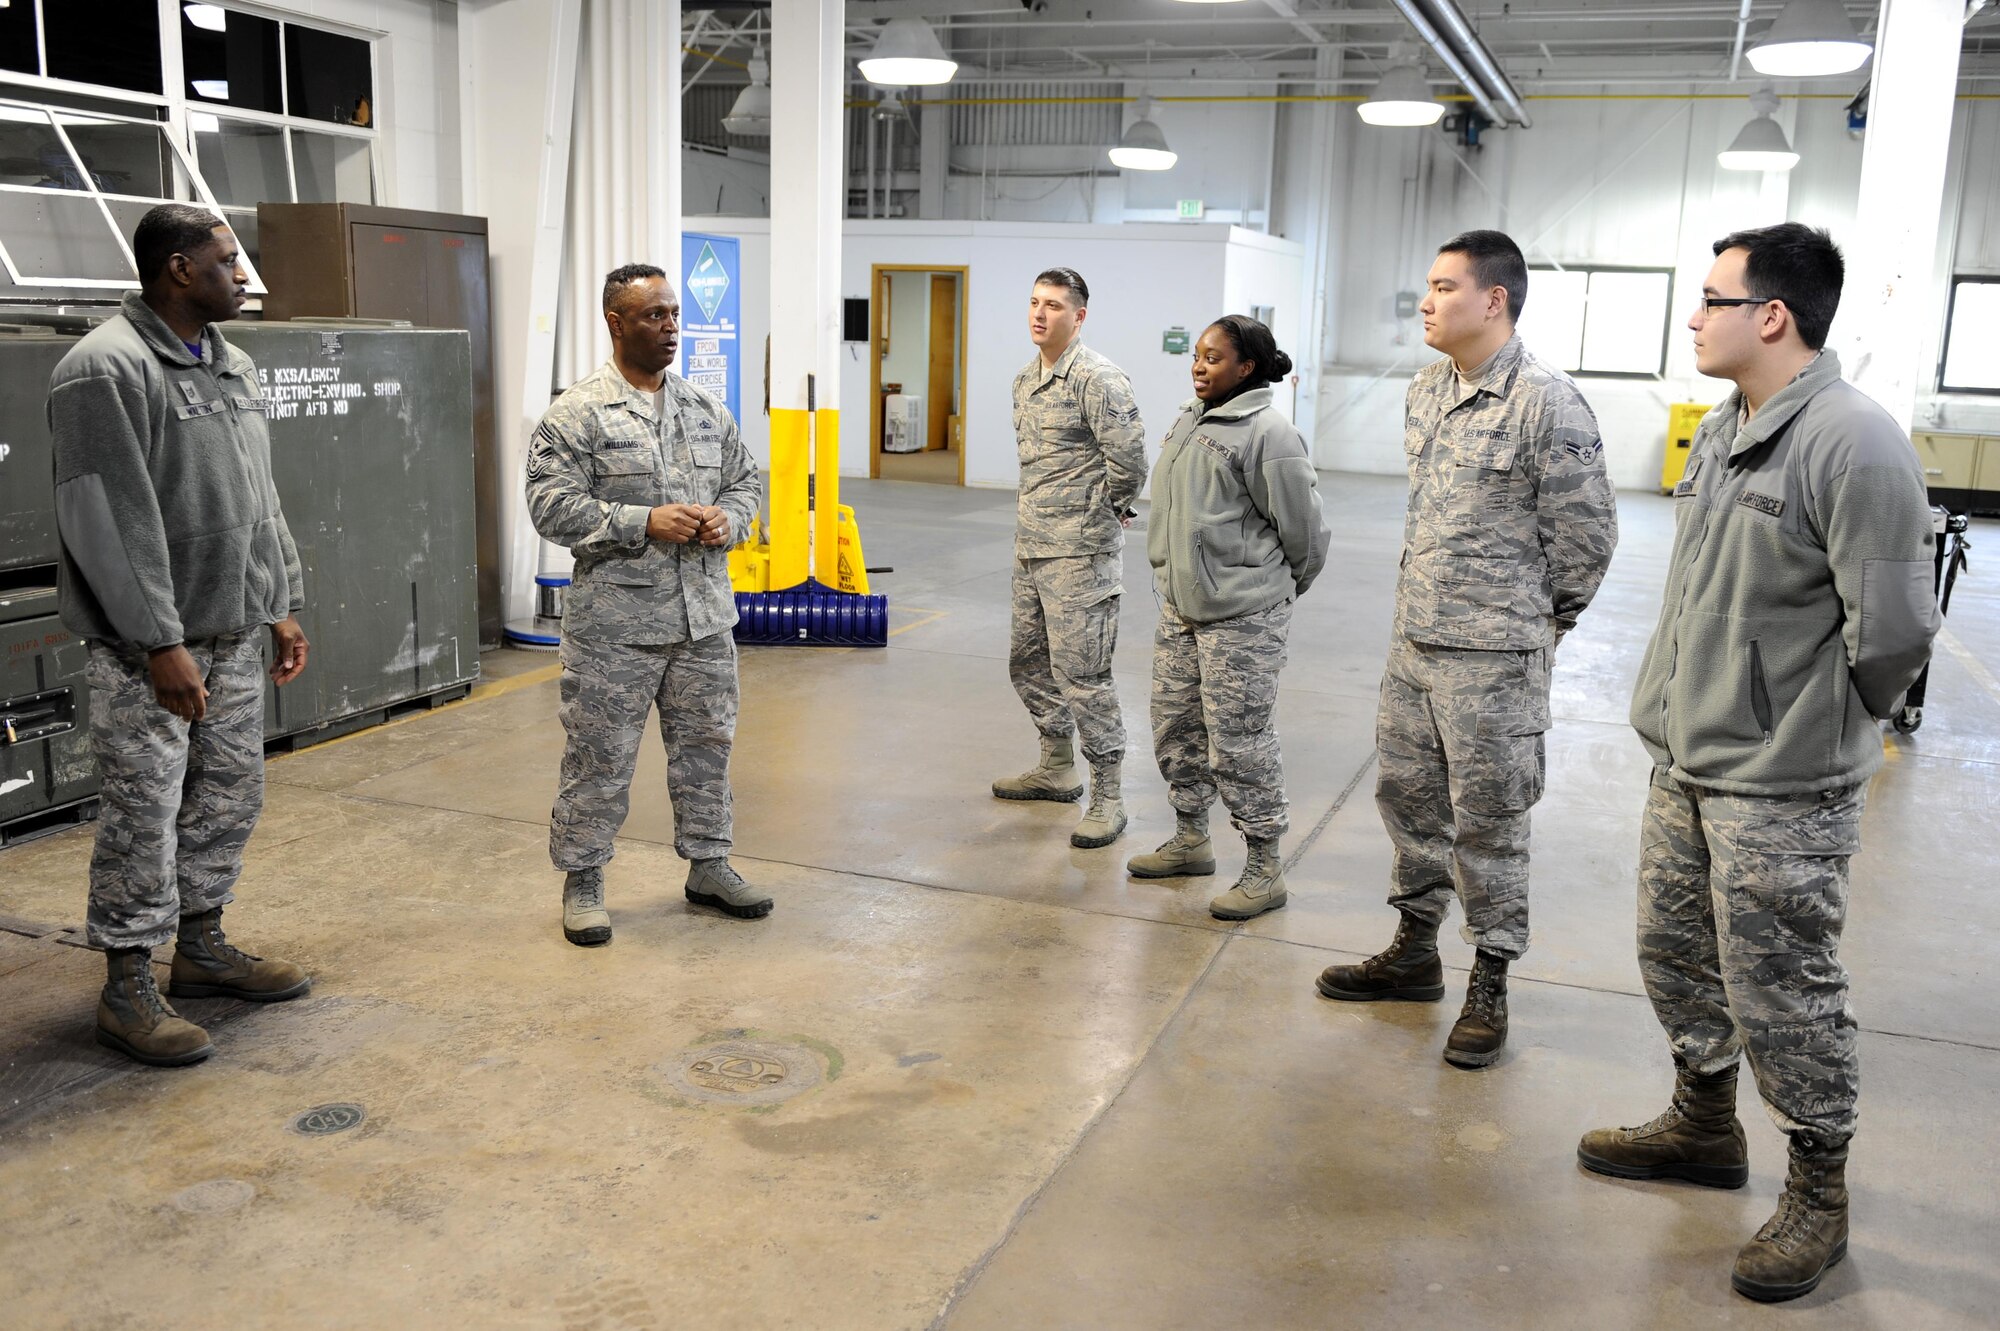 Chief Master Sgt. Calvin Williams, Air Force Global Strike command chief, speaks with several Airmen at Minot Air Force Base, N.D., March 9, 2017. Williams visited several units on base to discuss the importance of their missions. (U.S. Air Force photo/Senior Airman Kristoffer Kaubisch)